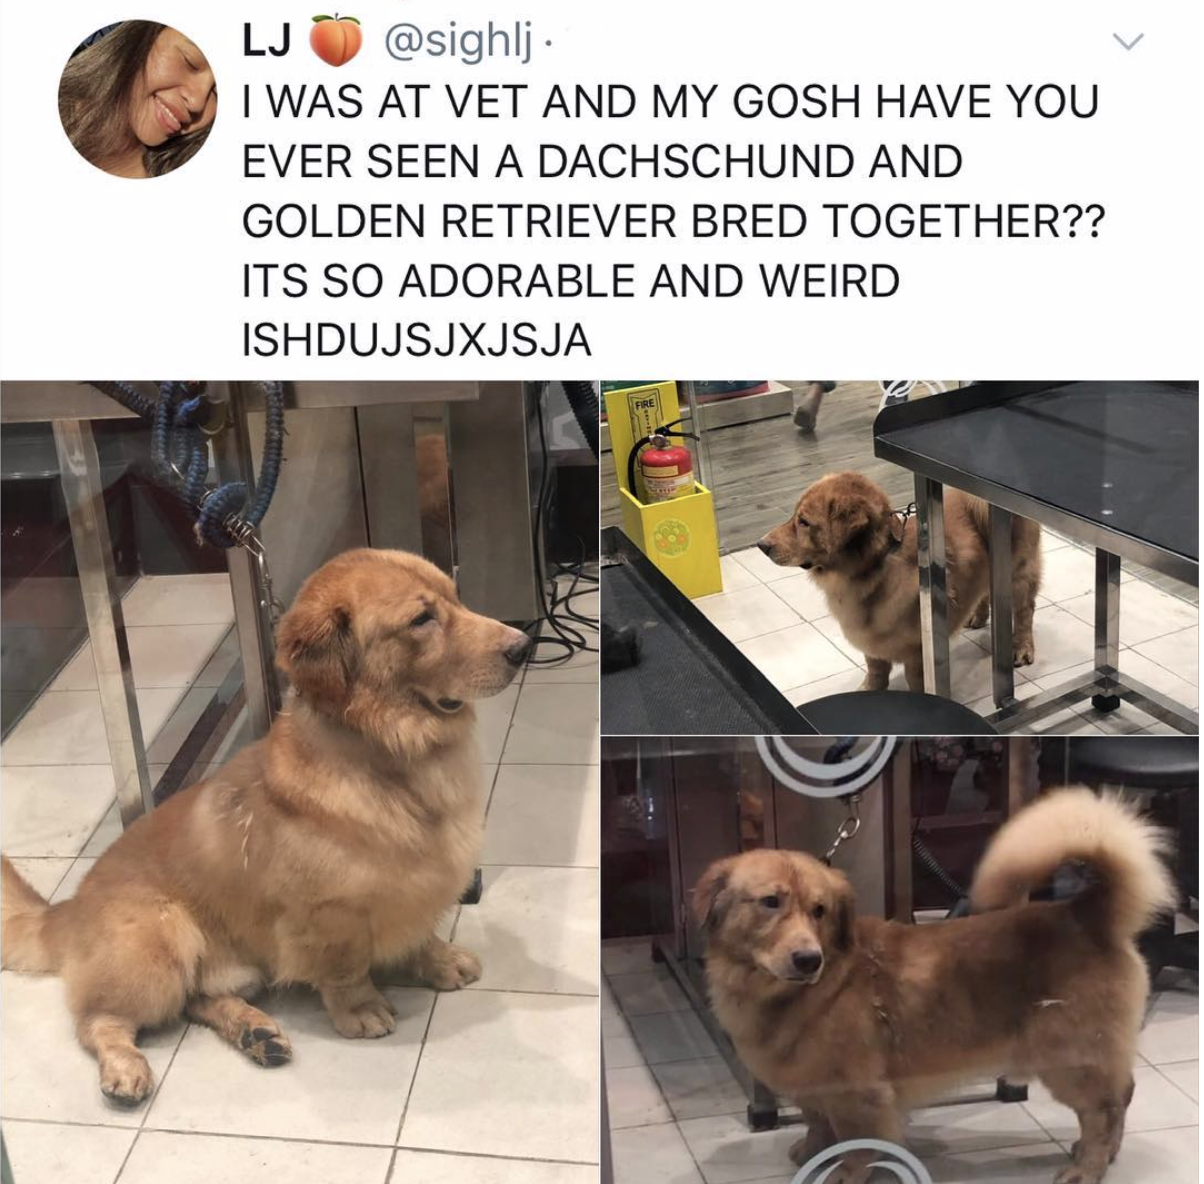 golden dachshund - Lj I Was At Vet And My Gosh Have You Ever Seen A Dachschund And Golden Retriever Bred Together?? Its So Adorable And Weird Ishdujsjxjsja